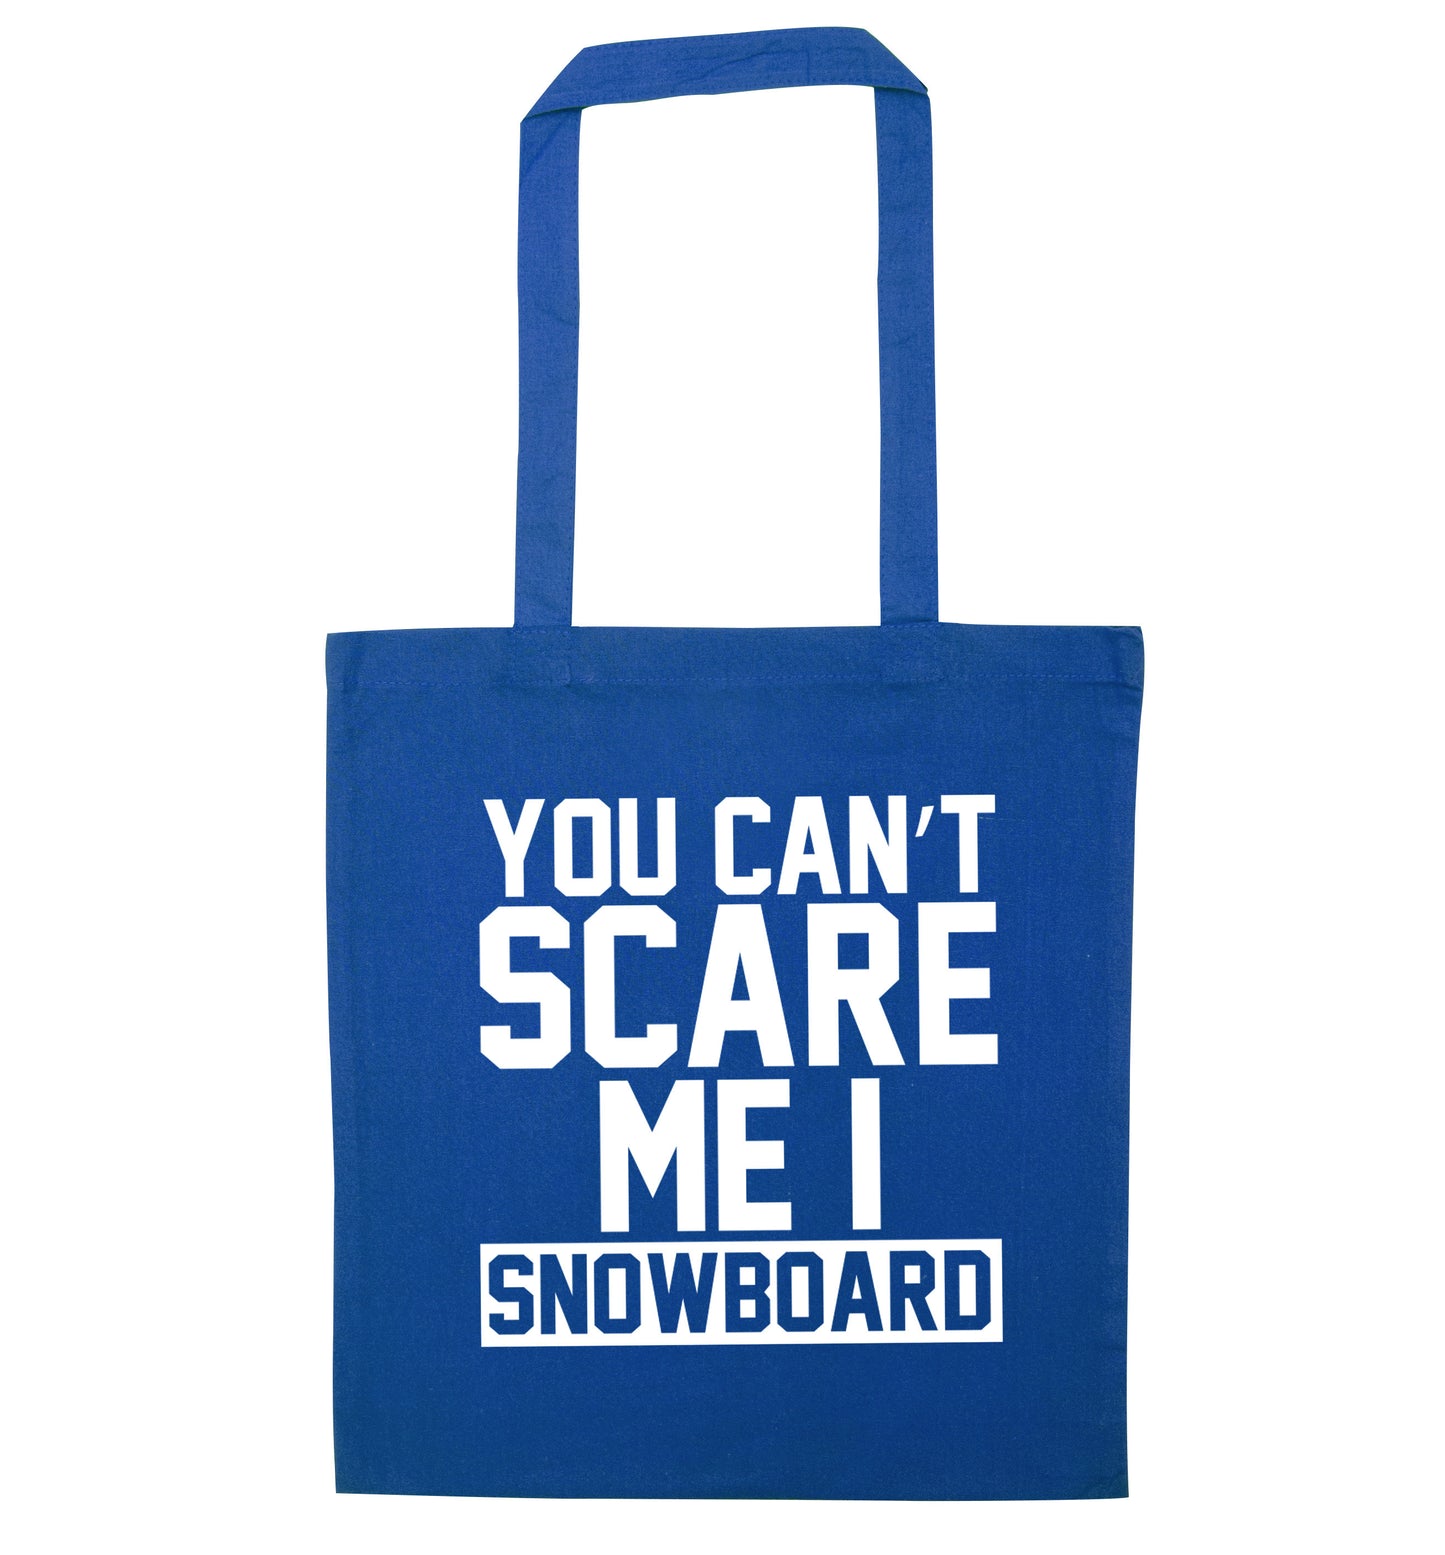 You can't scare me I snowboard blue tote bag